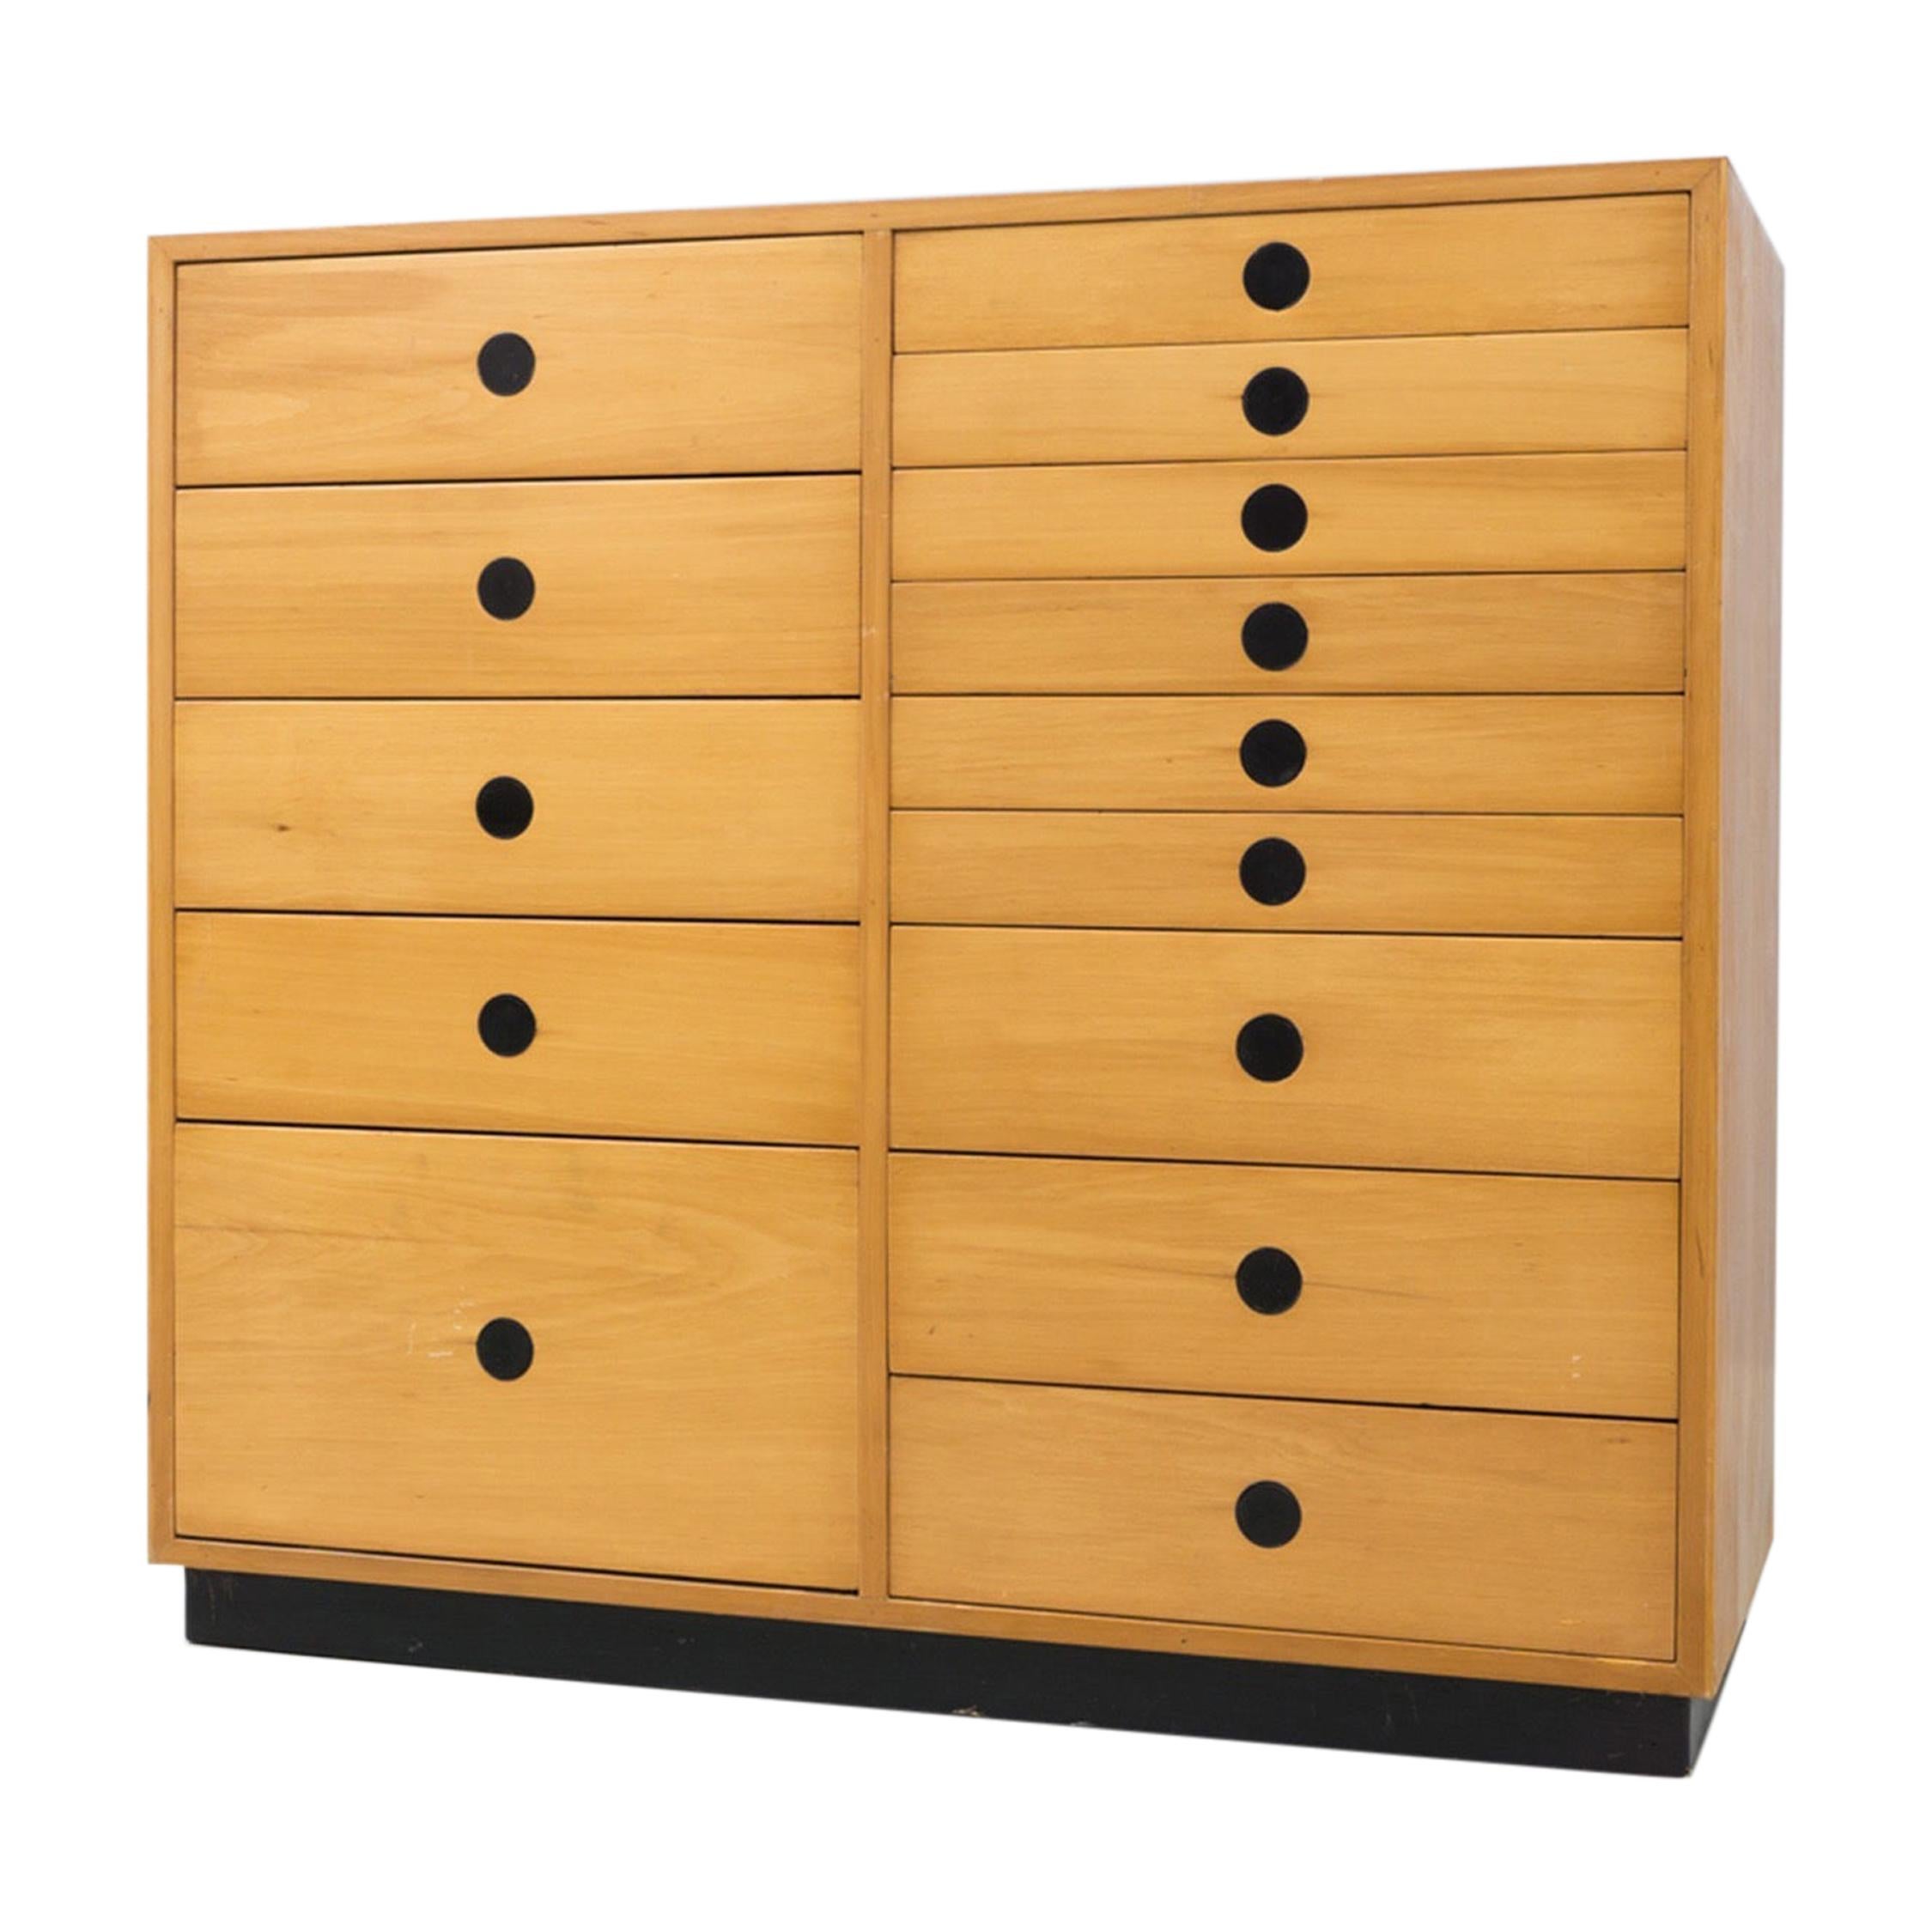 Dresser, Ash Wood, by Paolo Tilche, 1959